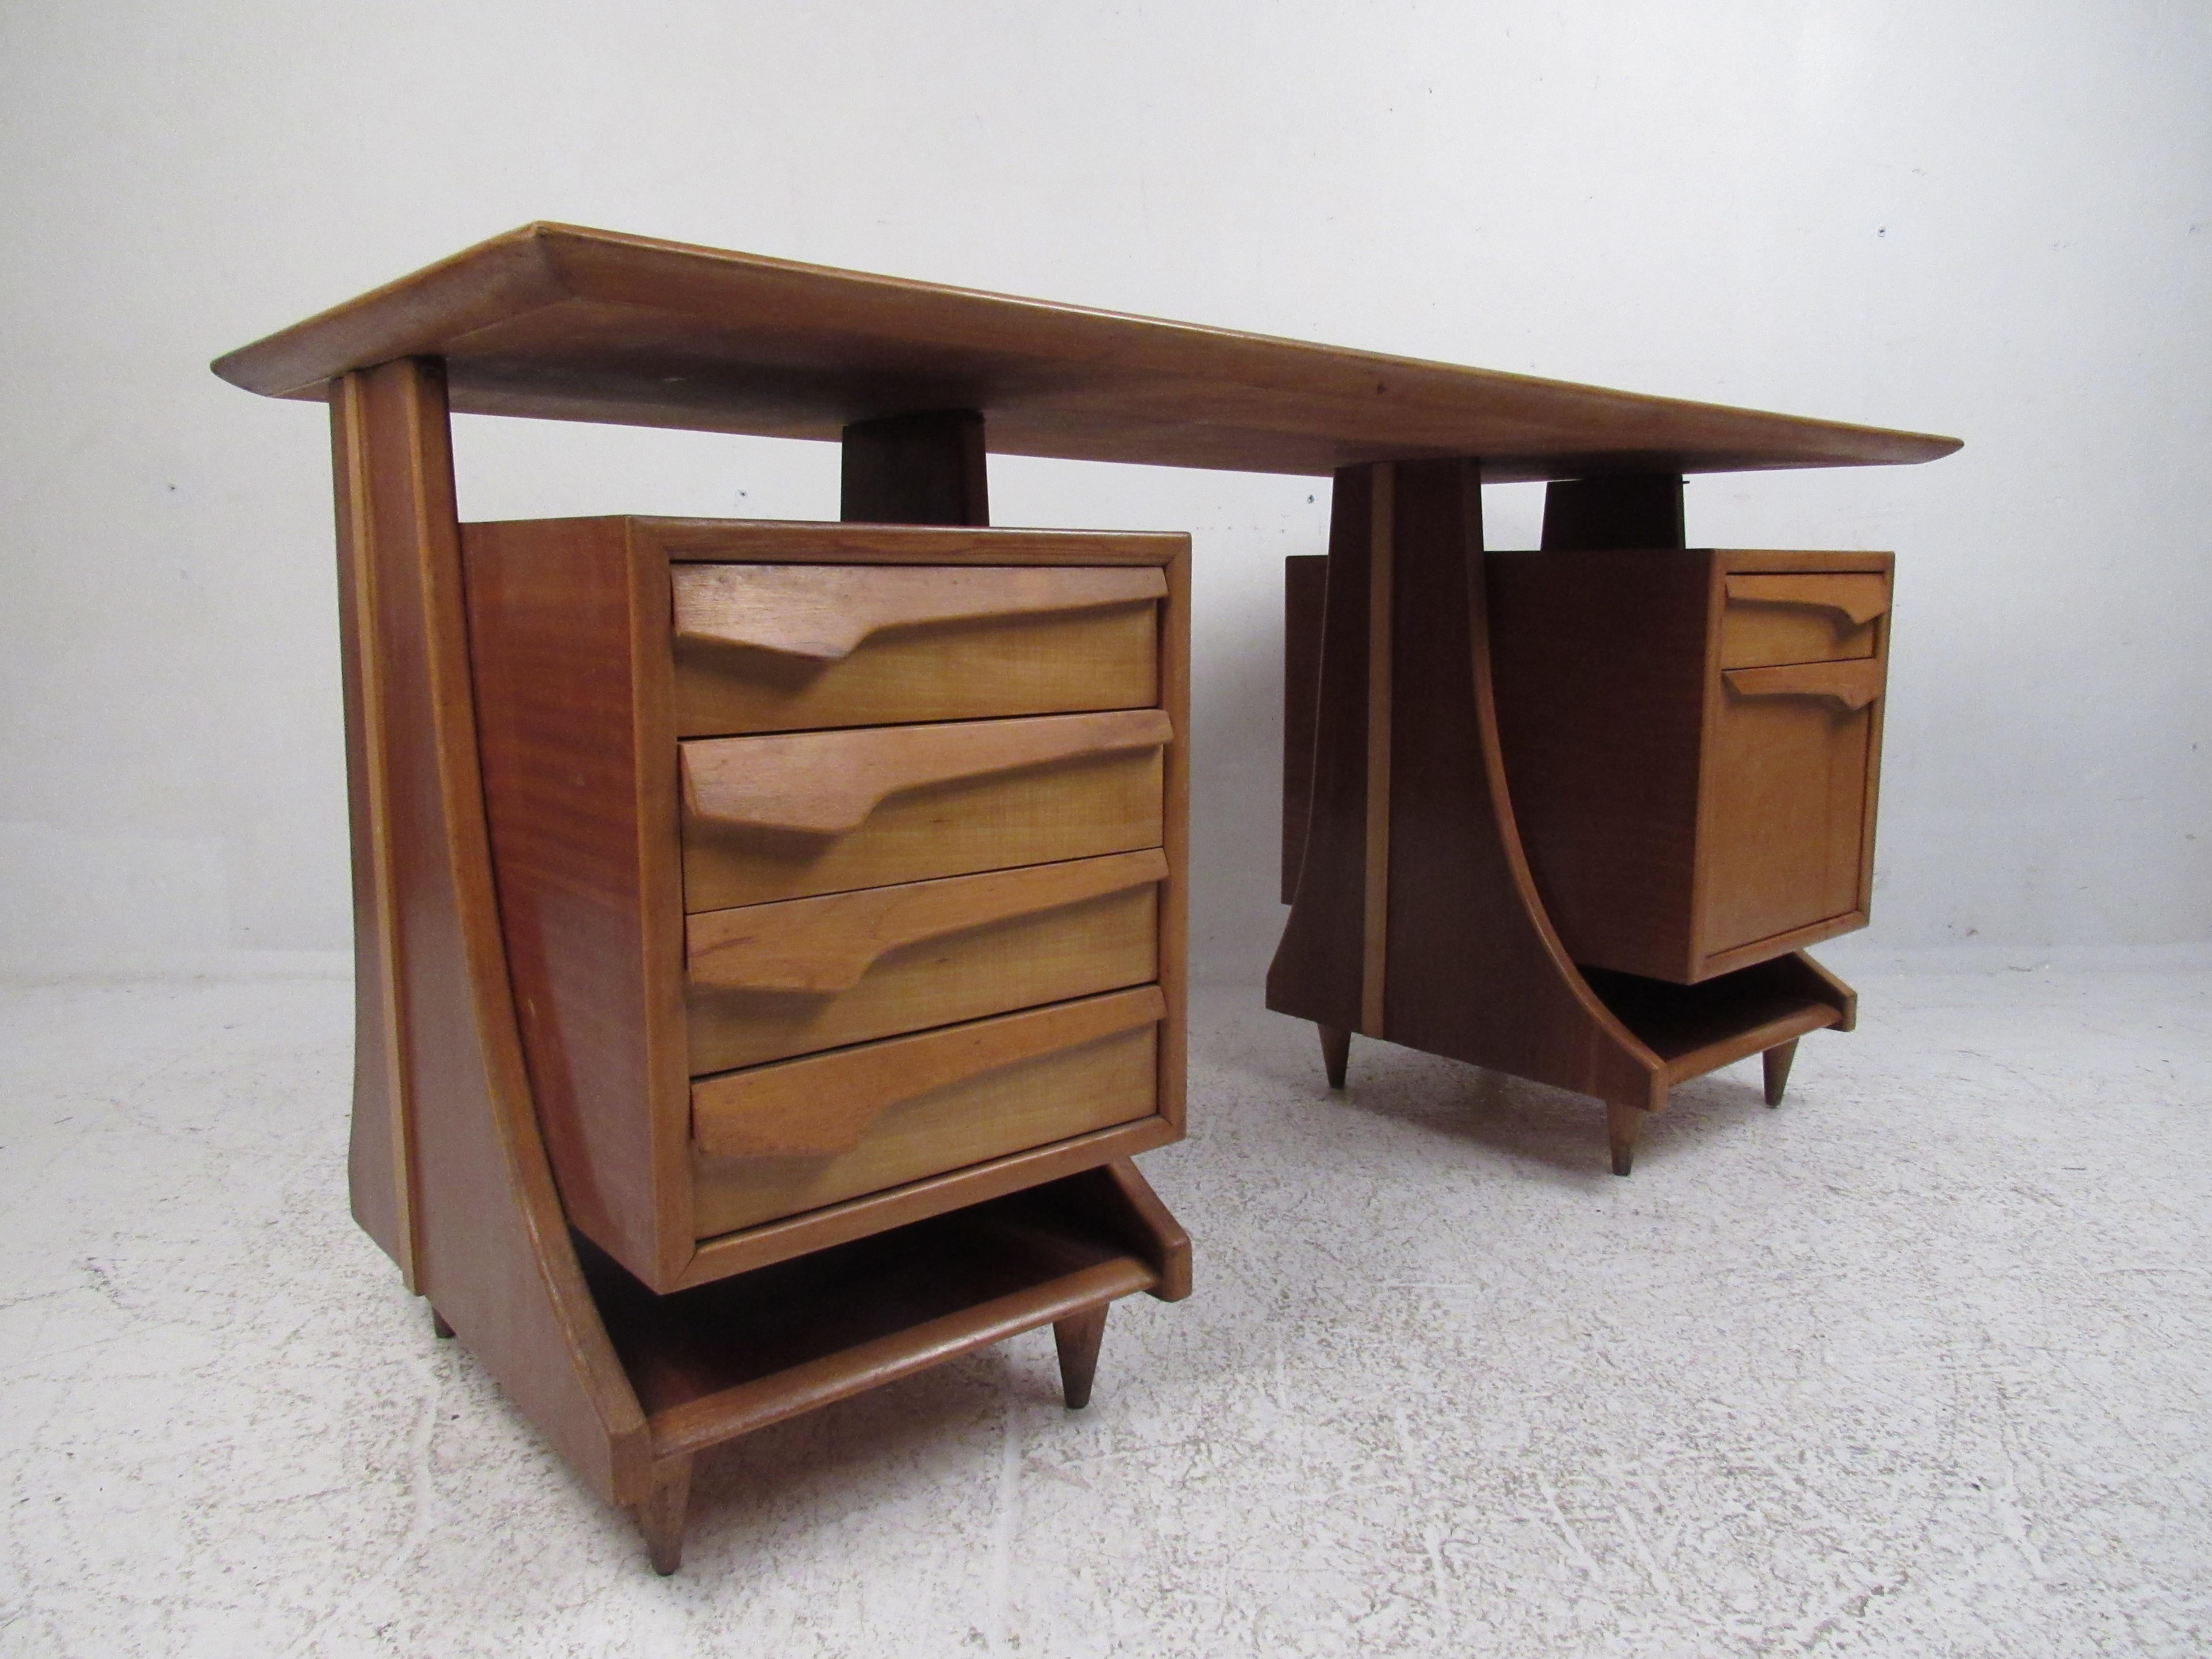 This beautiful vintage modern Italian desk features a floating top, sculpted drawer pulls, and arched sides. A well-made case piece with a large curved drawer that opens sideways offering ample room for files. The large tabletop and spacious drawers